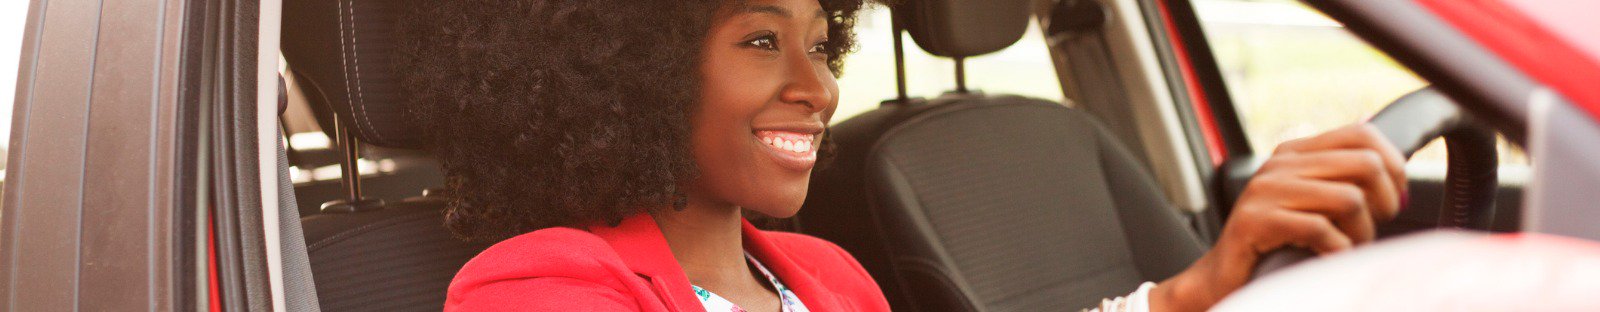 woman-smiling-driving-red-car